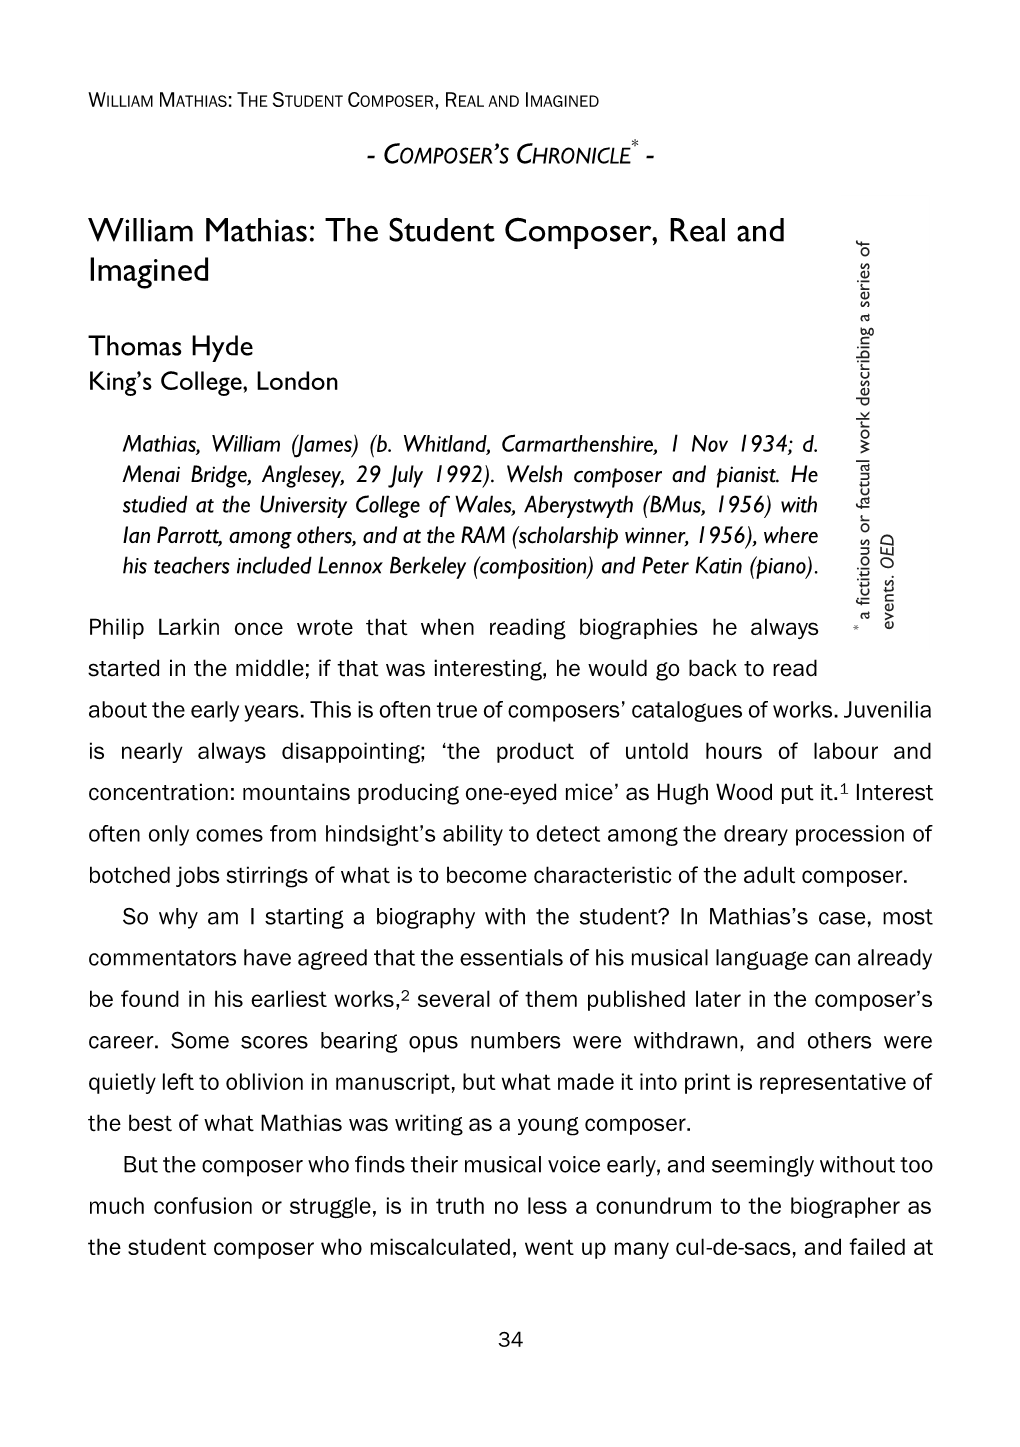 William Mathias: the Student Composer, Real and Imagined